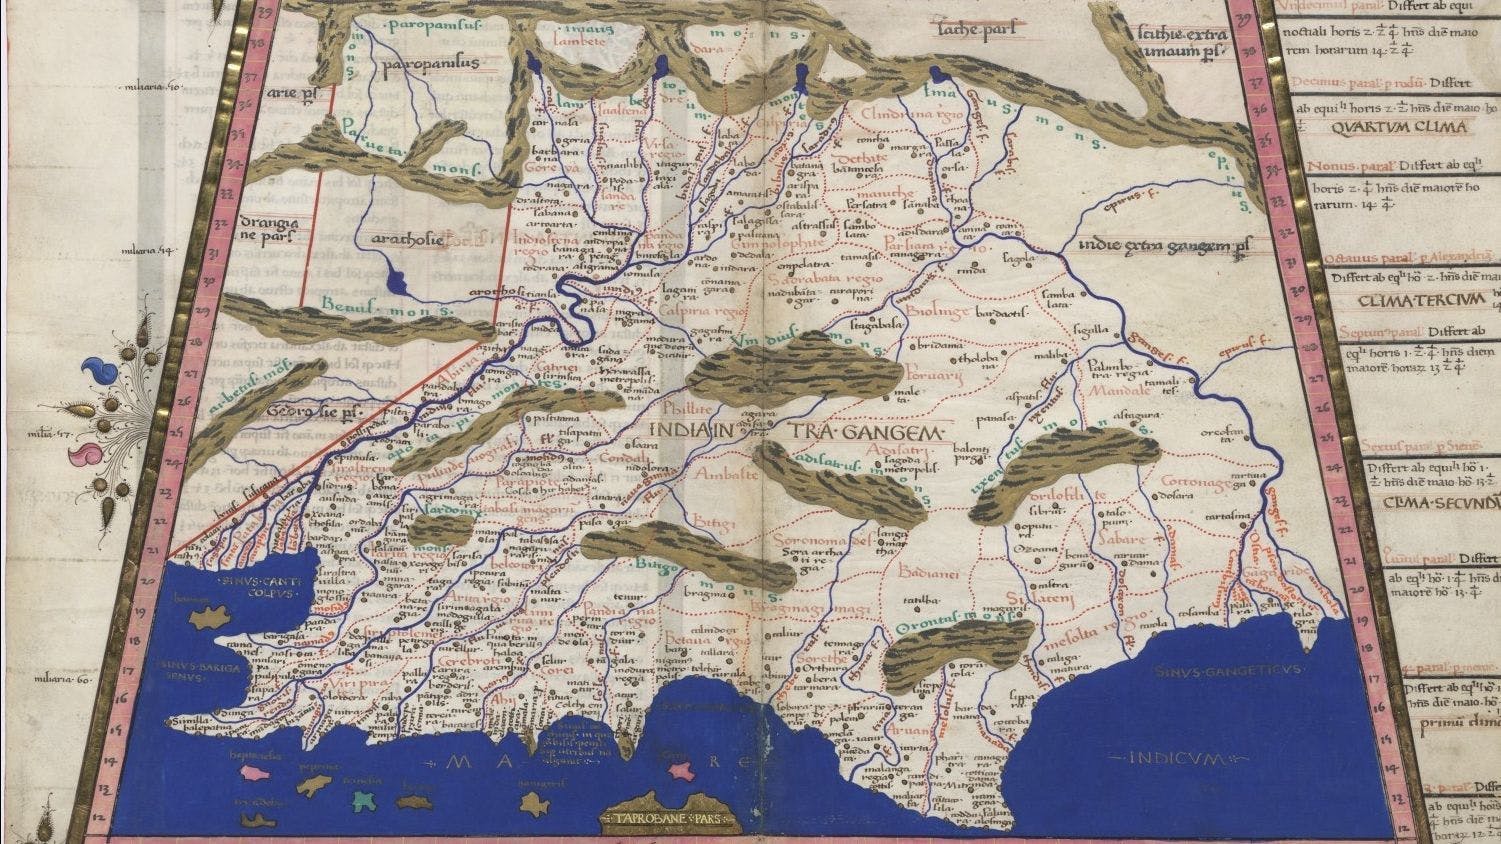 A 15th century version of Ptolemy’s map of India